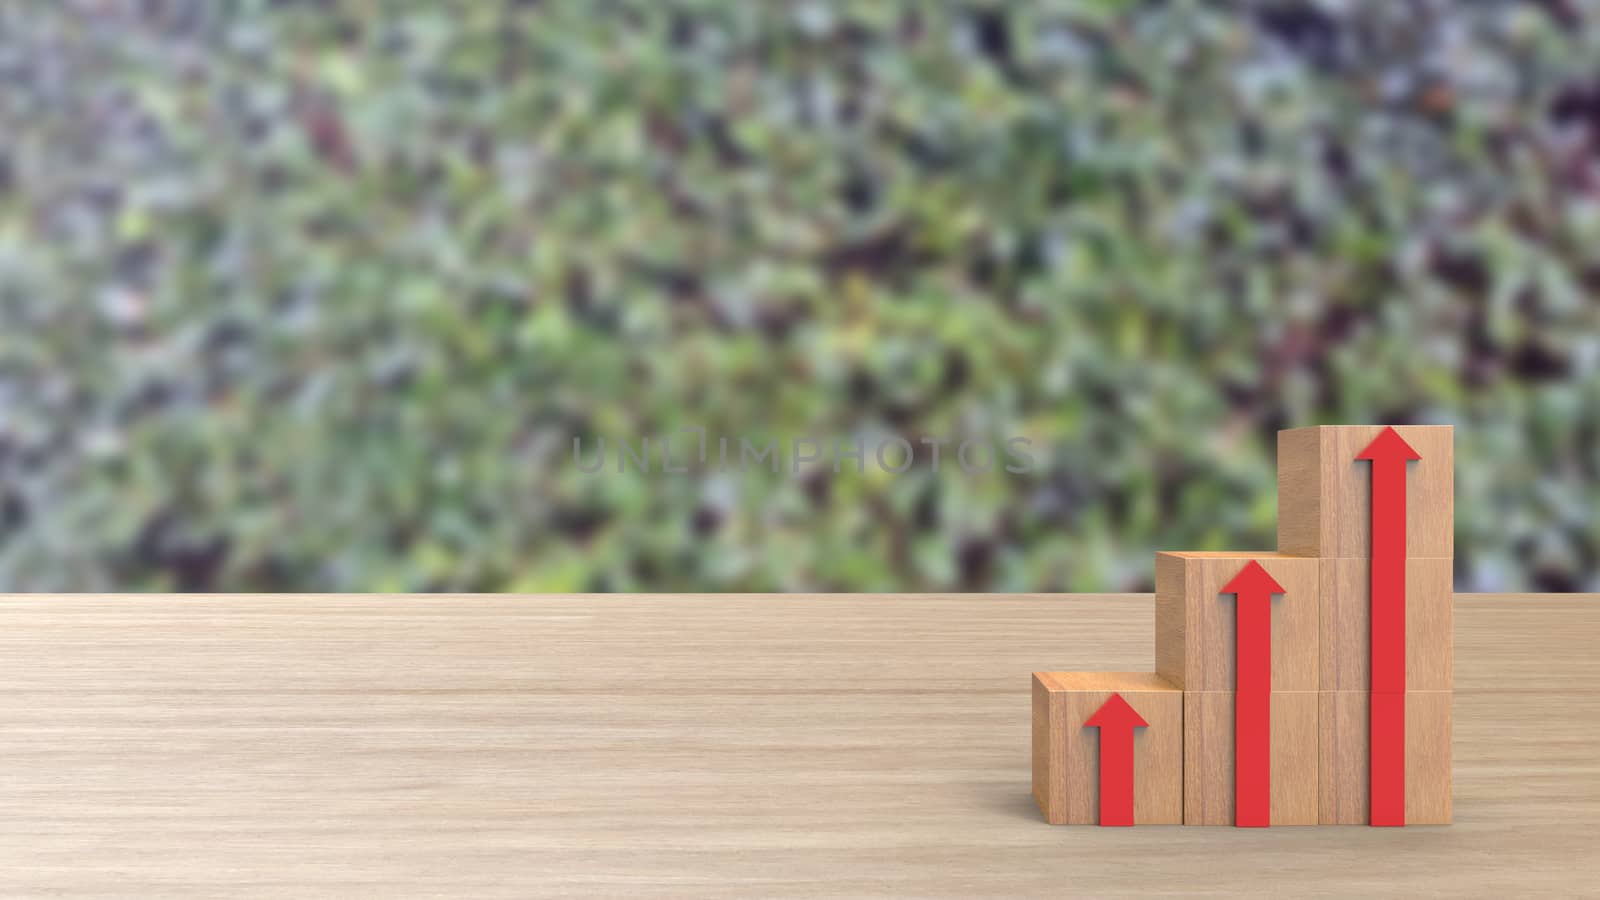 wood block stacking as down stair with red arrow up. Ladder career path concept for business growth success process. On wood wooden table climbing green leaves background HD. Render 3d illustration by Andreajk3